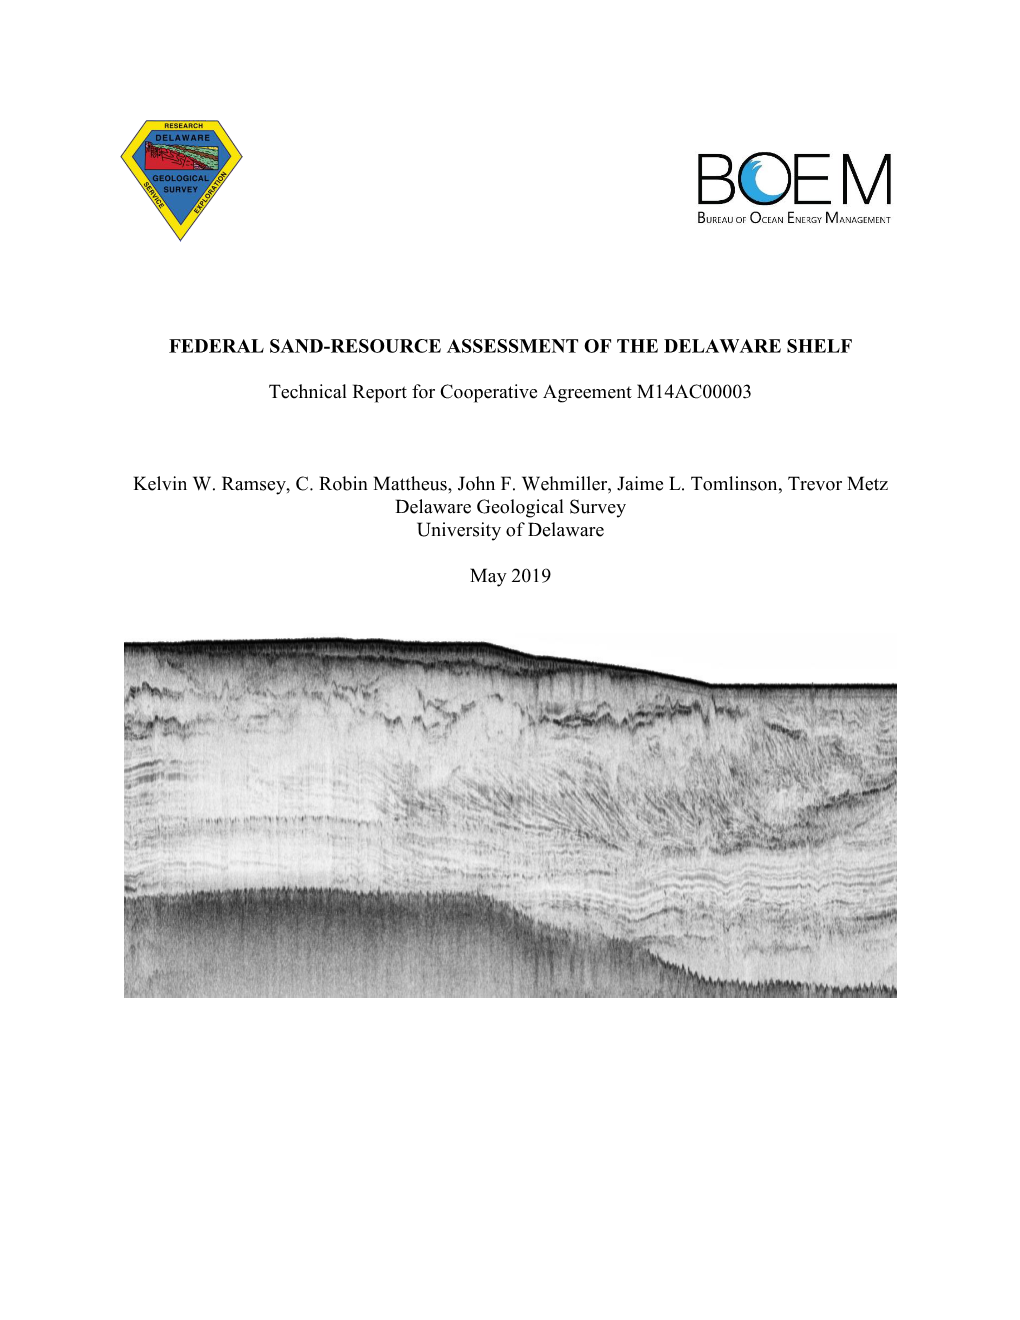 Federal Sand-Resource Assessment of the Delaware Shelf